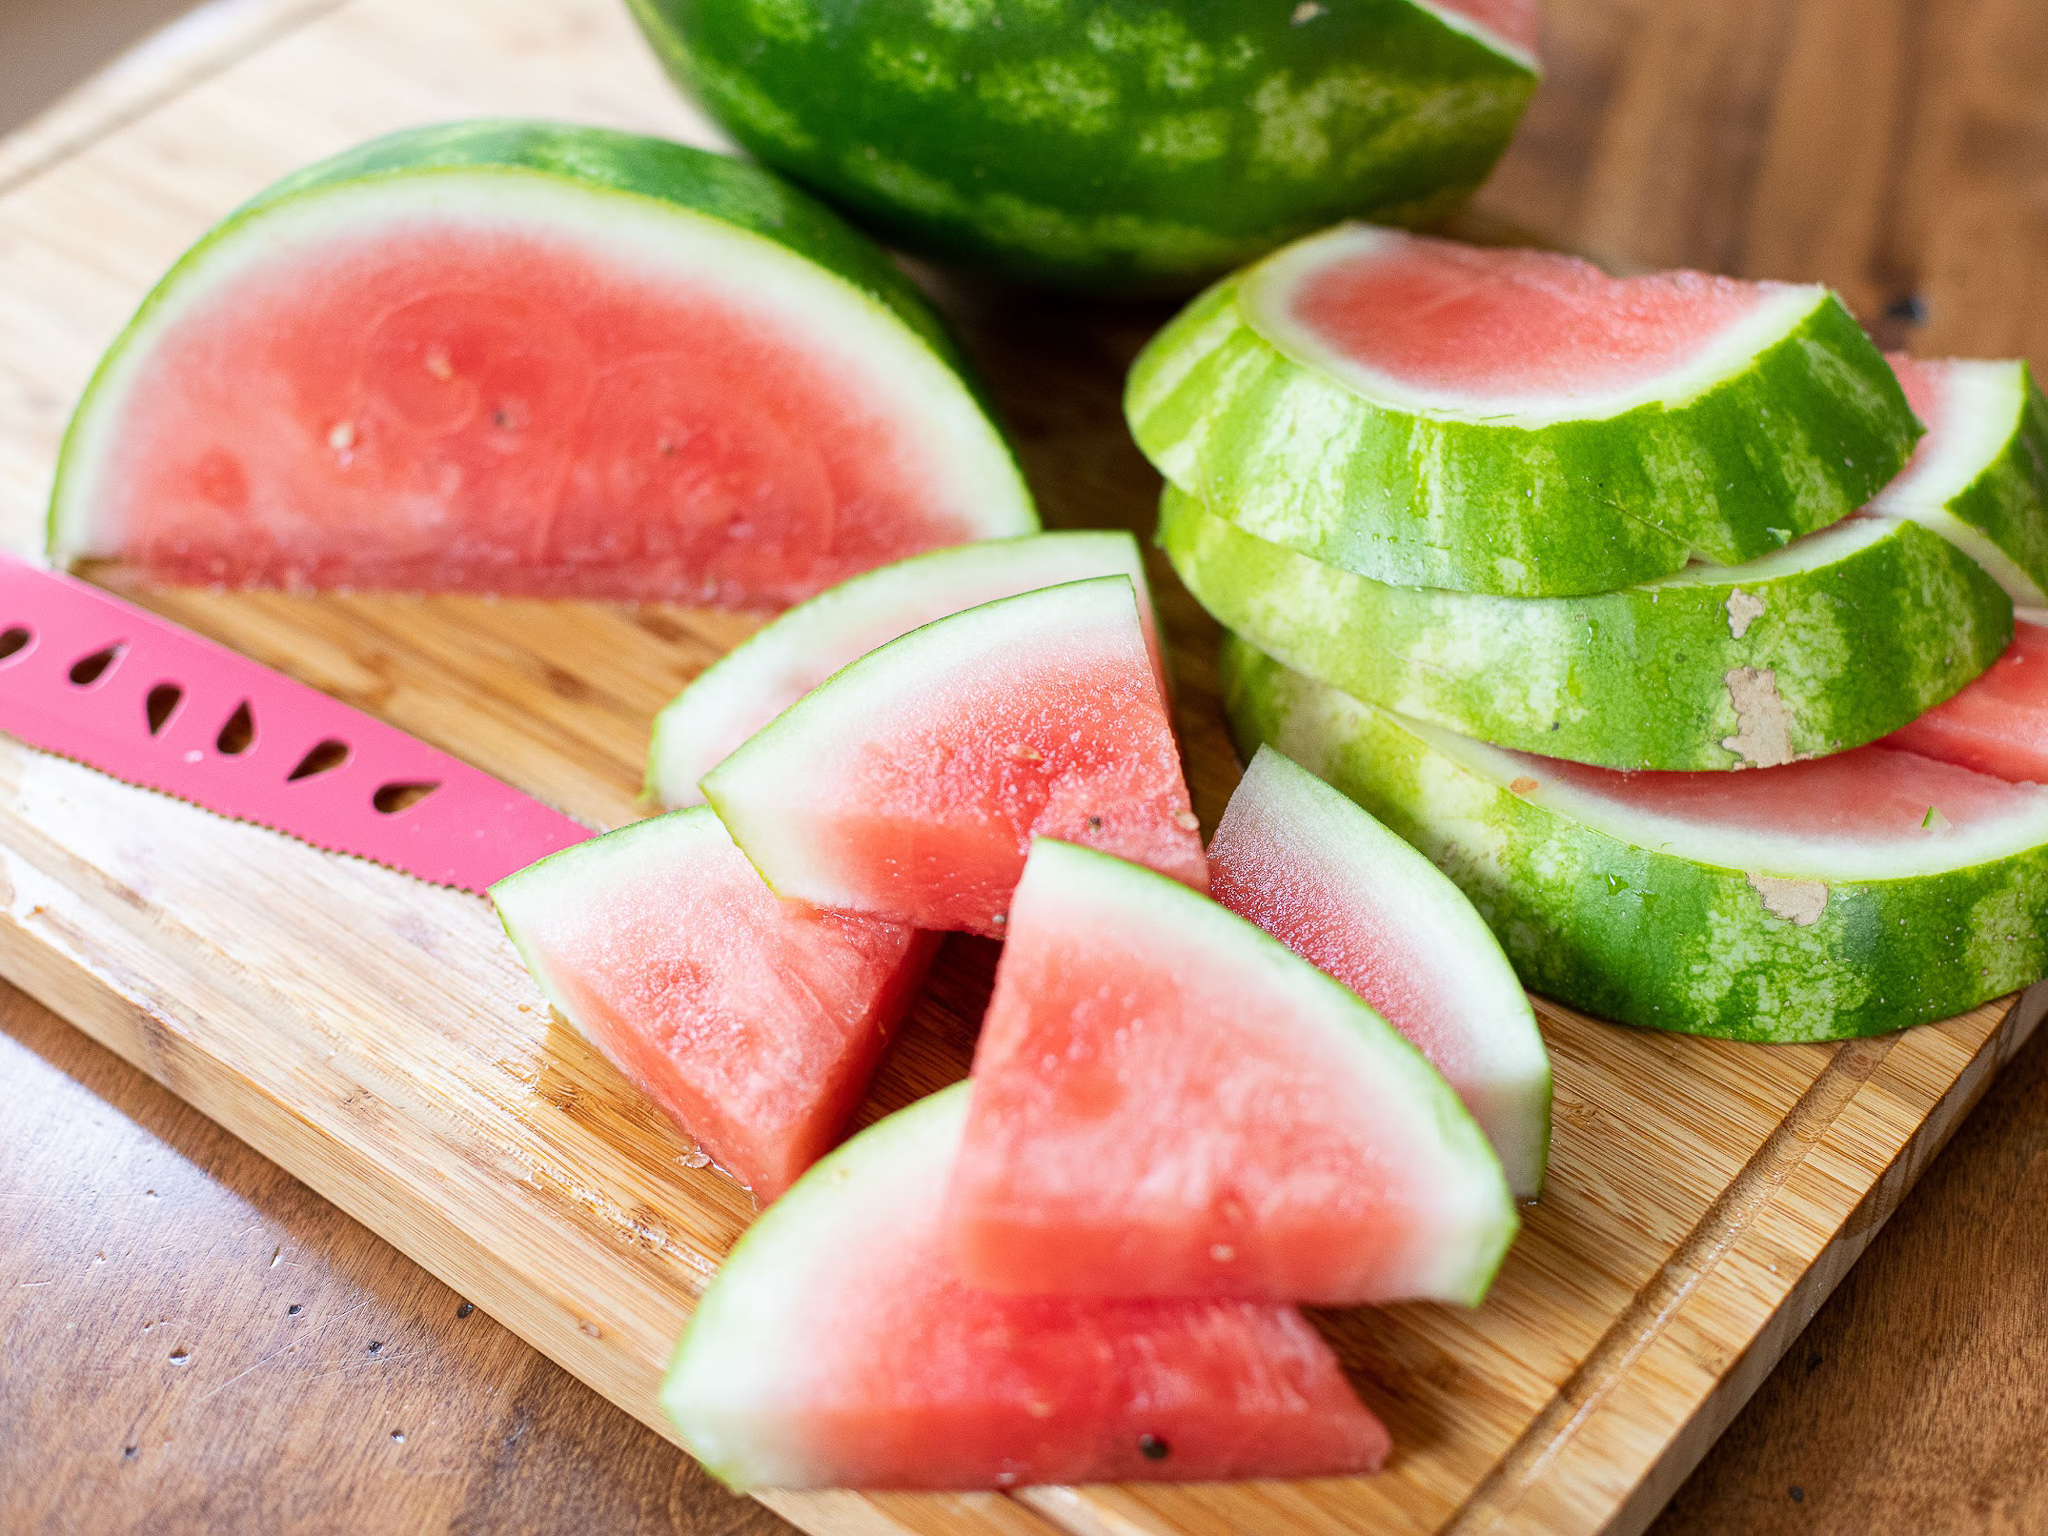 Grab Watermelons For Only $2.99 At Kroger